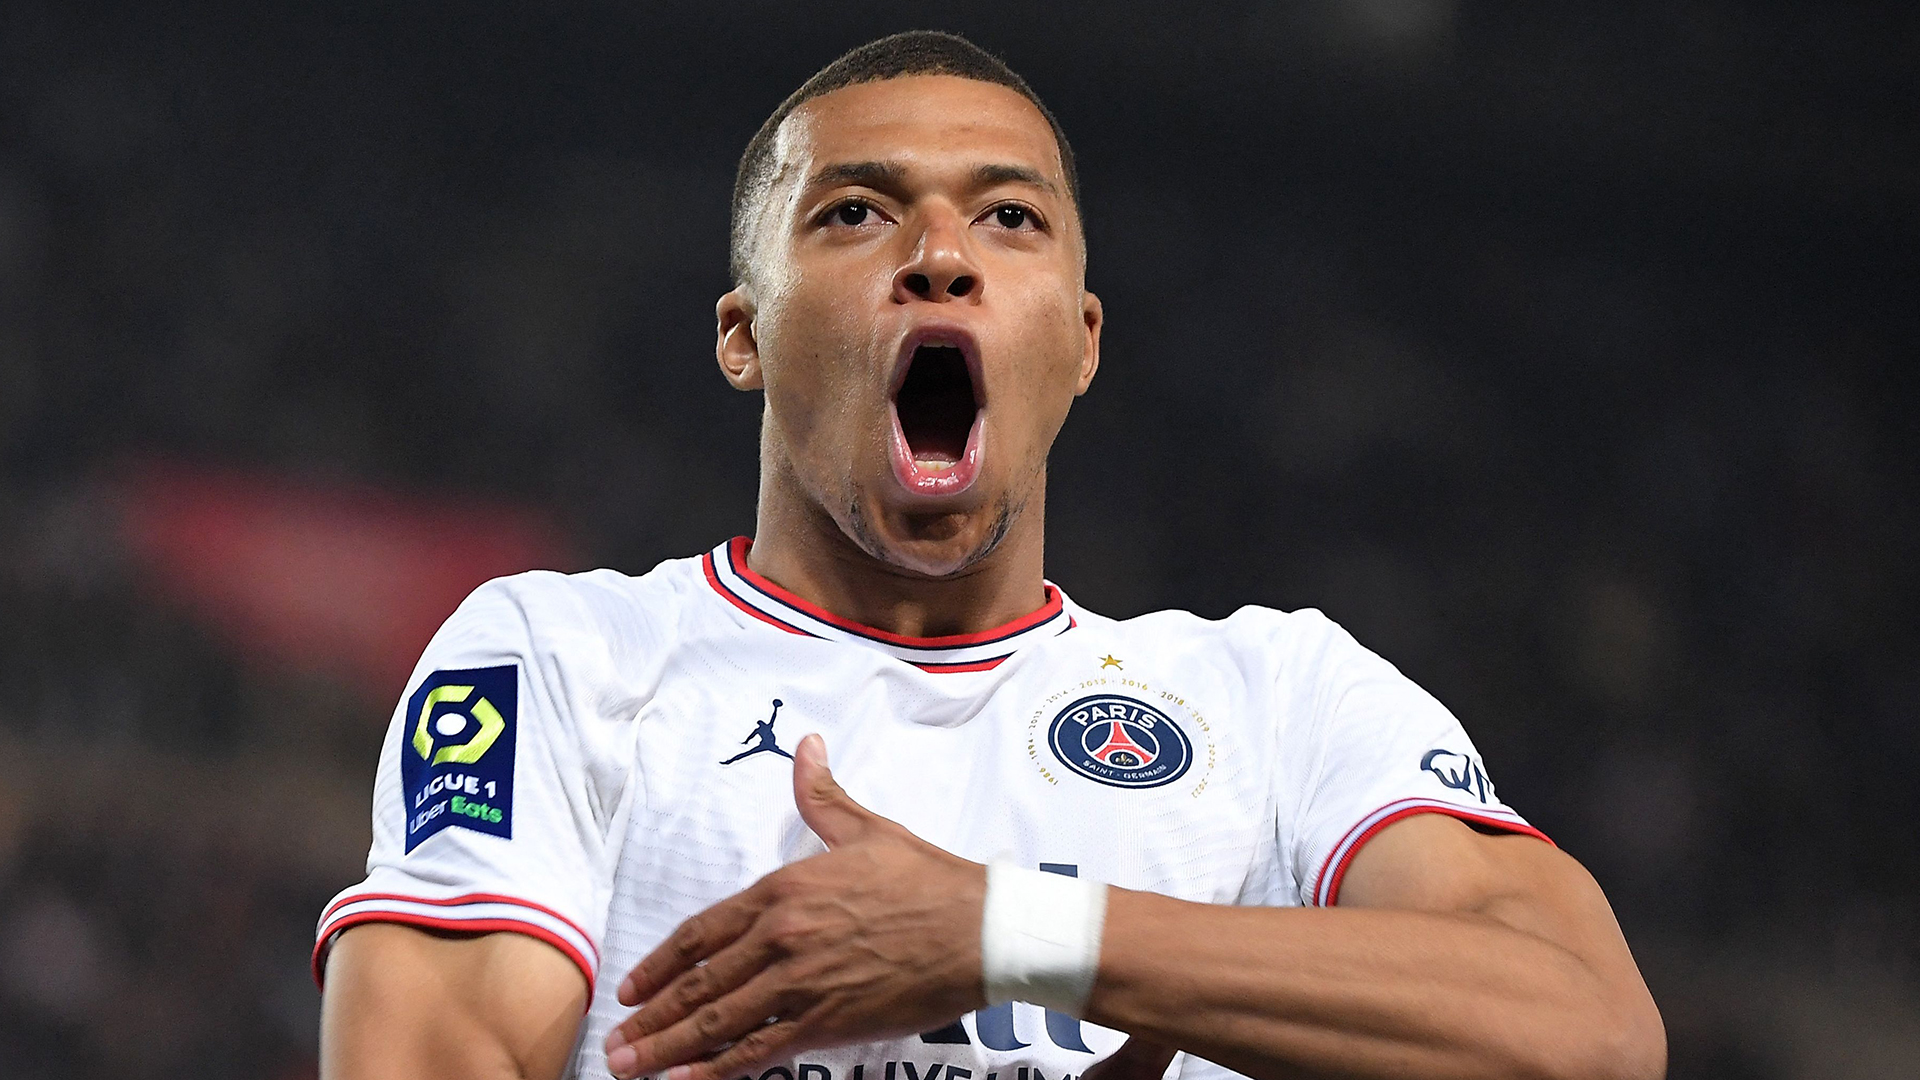 Mbappe to sign PSG contract extension and snub Real Madrid transfer